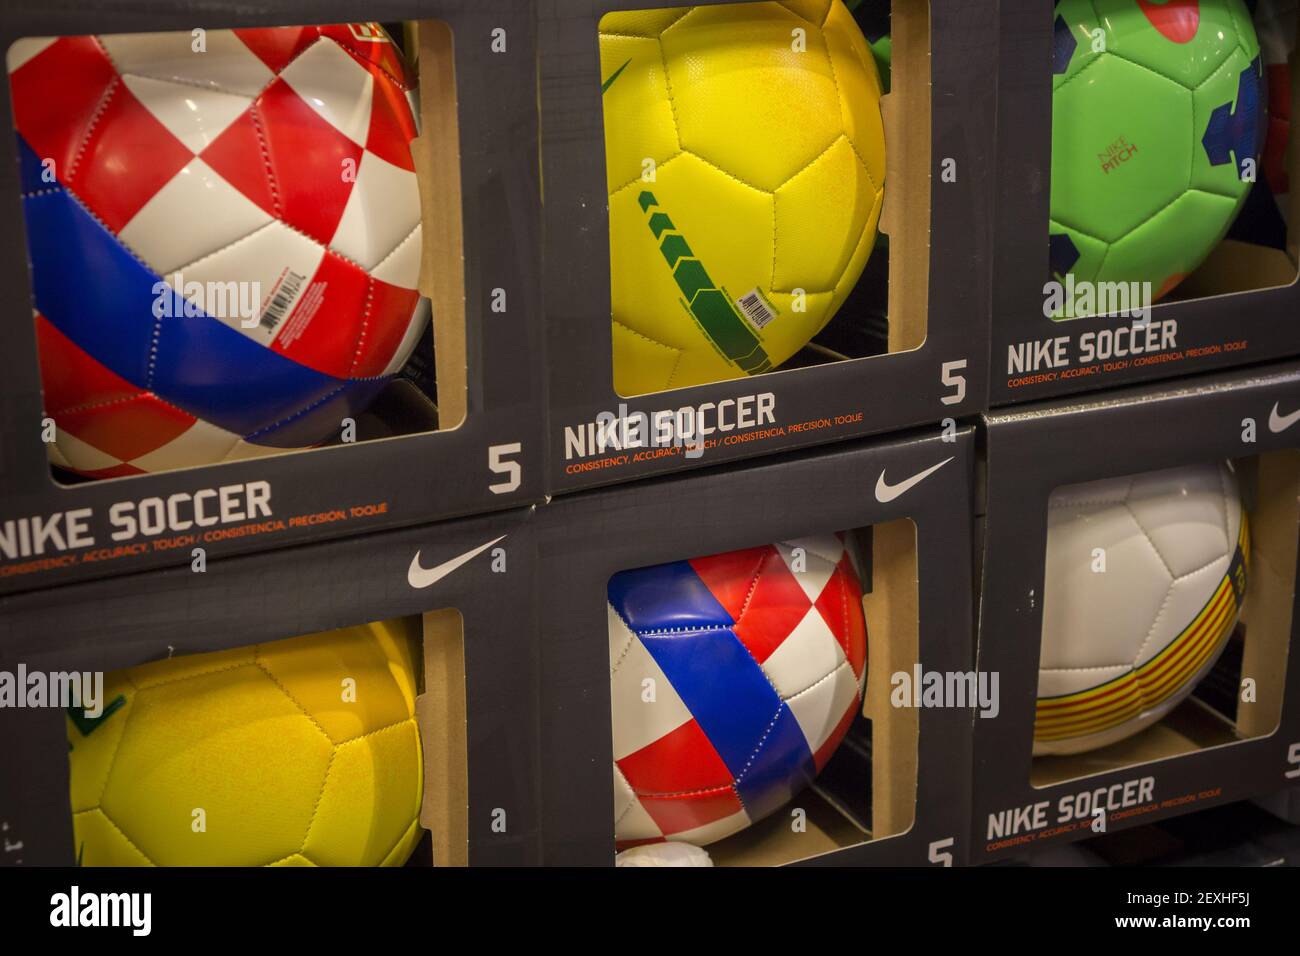 Nike football (soccer) merchandising items in New York on Tuesday, June 3,  2014. Nike announced that it is monitoring the situation related to the  accusations against their endorser, Cristiano Ronaldo, by a